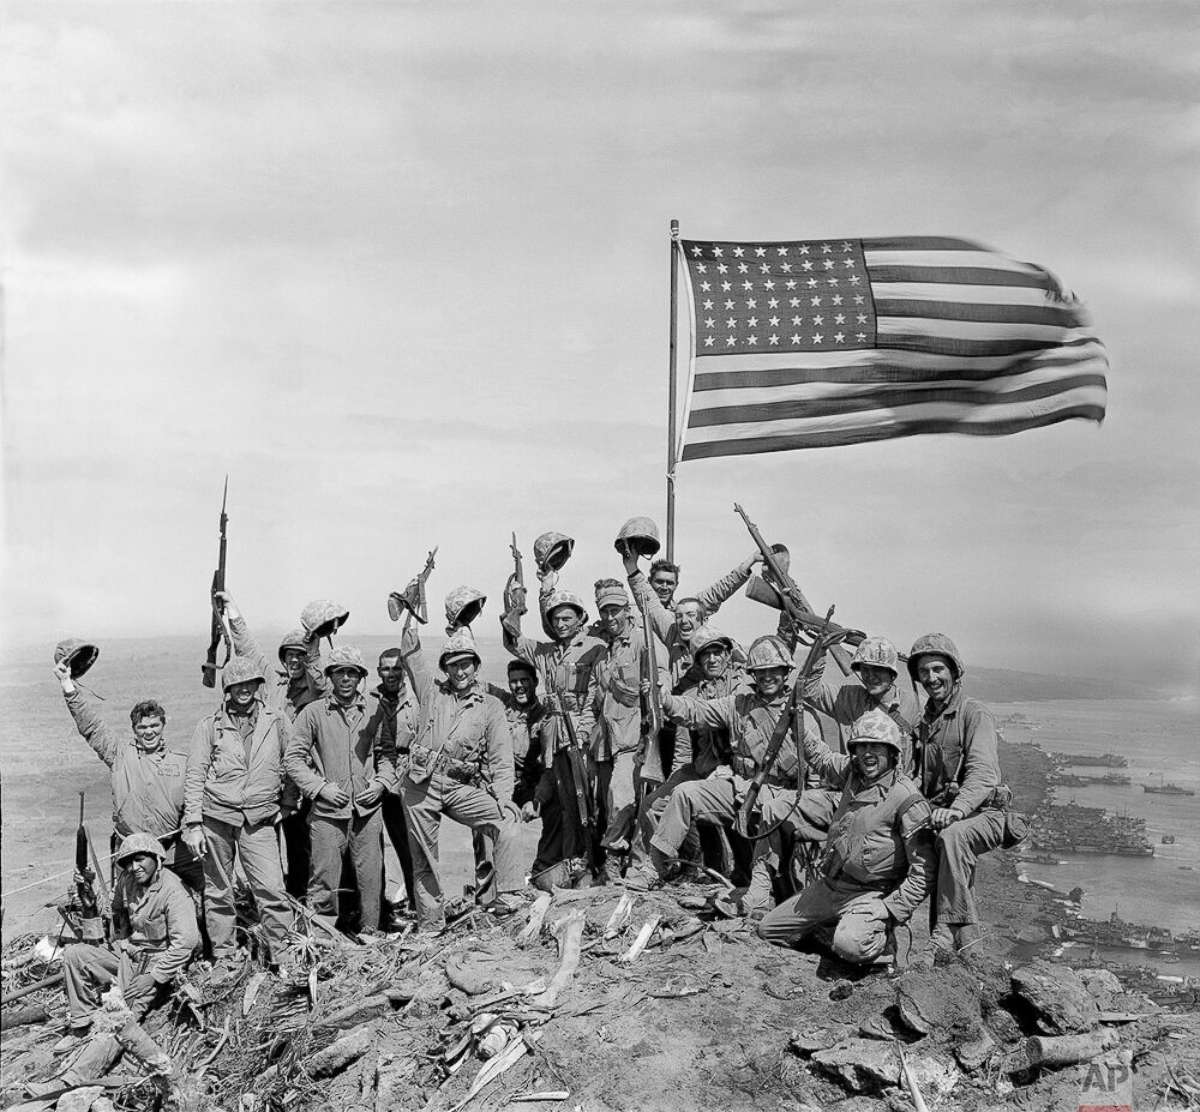 PHOTO: U.S. Marines of the 28th Regiment, fifth division, cheer and hold up their rifles after the second flag raising atop Mount Suribachi on Iwo Jima, a volcanic Japanese island, on Feb. 23, 1945 during World War II.